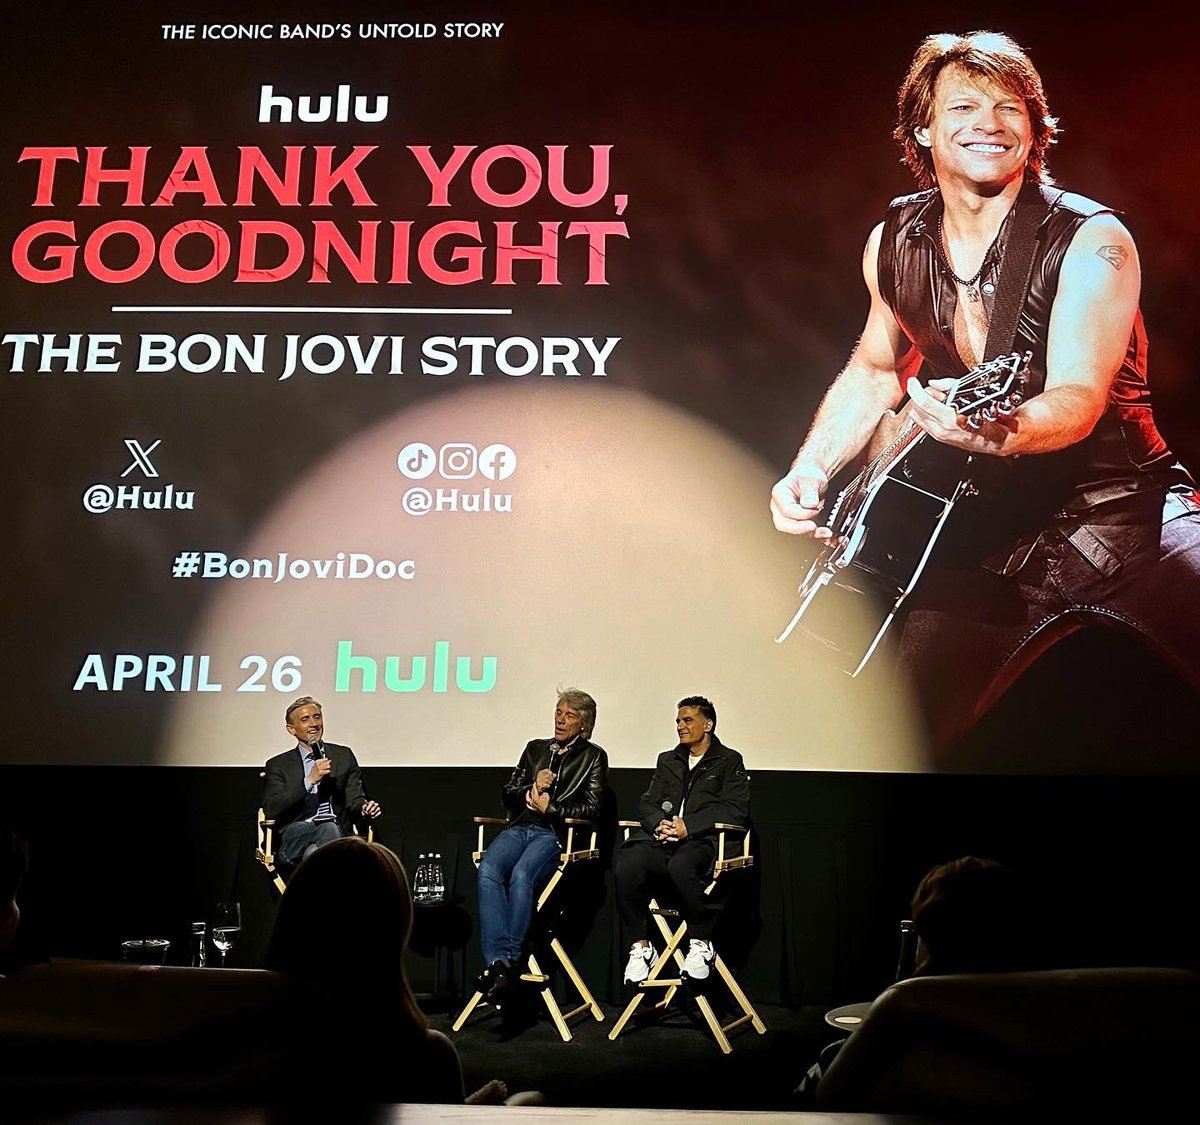 It was wonderful to meet @jonbonjovi after watching his personal videos from 40 years ago 😳😍 The Bon Jovi Story is now on @hulu #BonJovi40 In this @nytimes pic I’m wearing a silk hand embroidered coat, a gift given to me after my talk in Uzbekistan 🥰🥰 @XFashion…